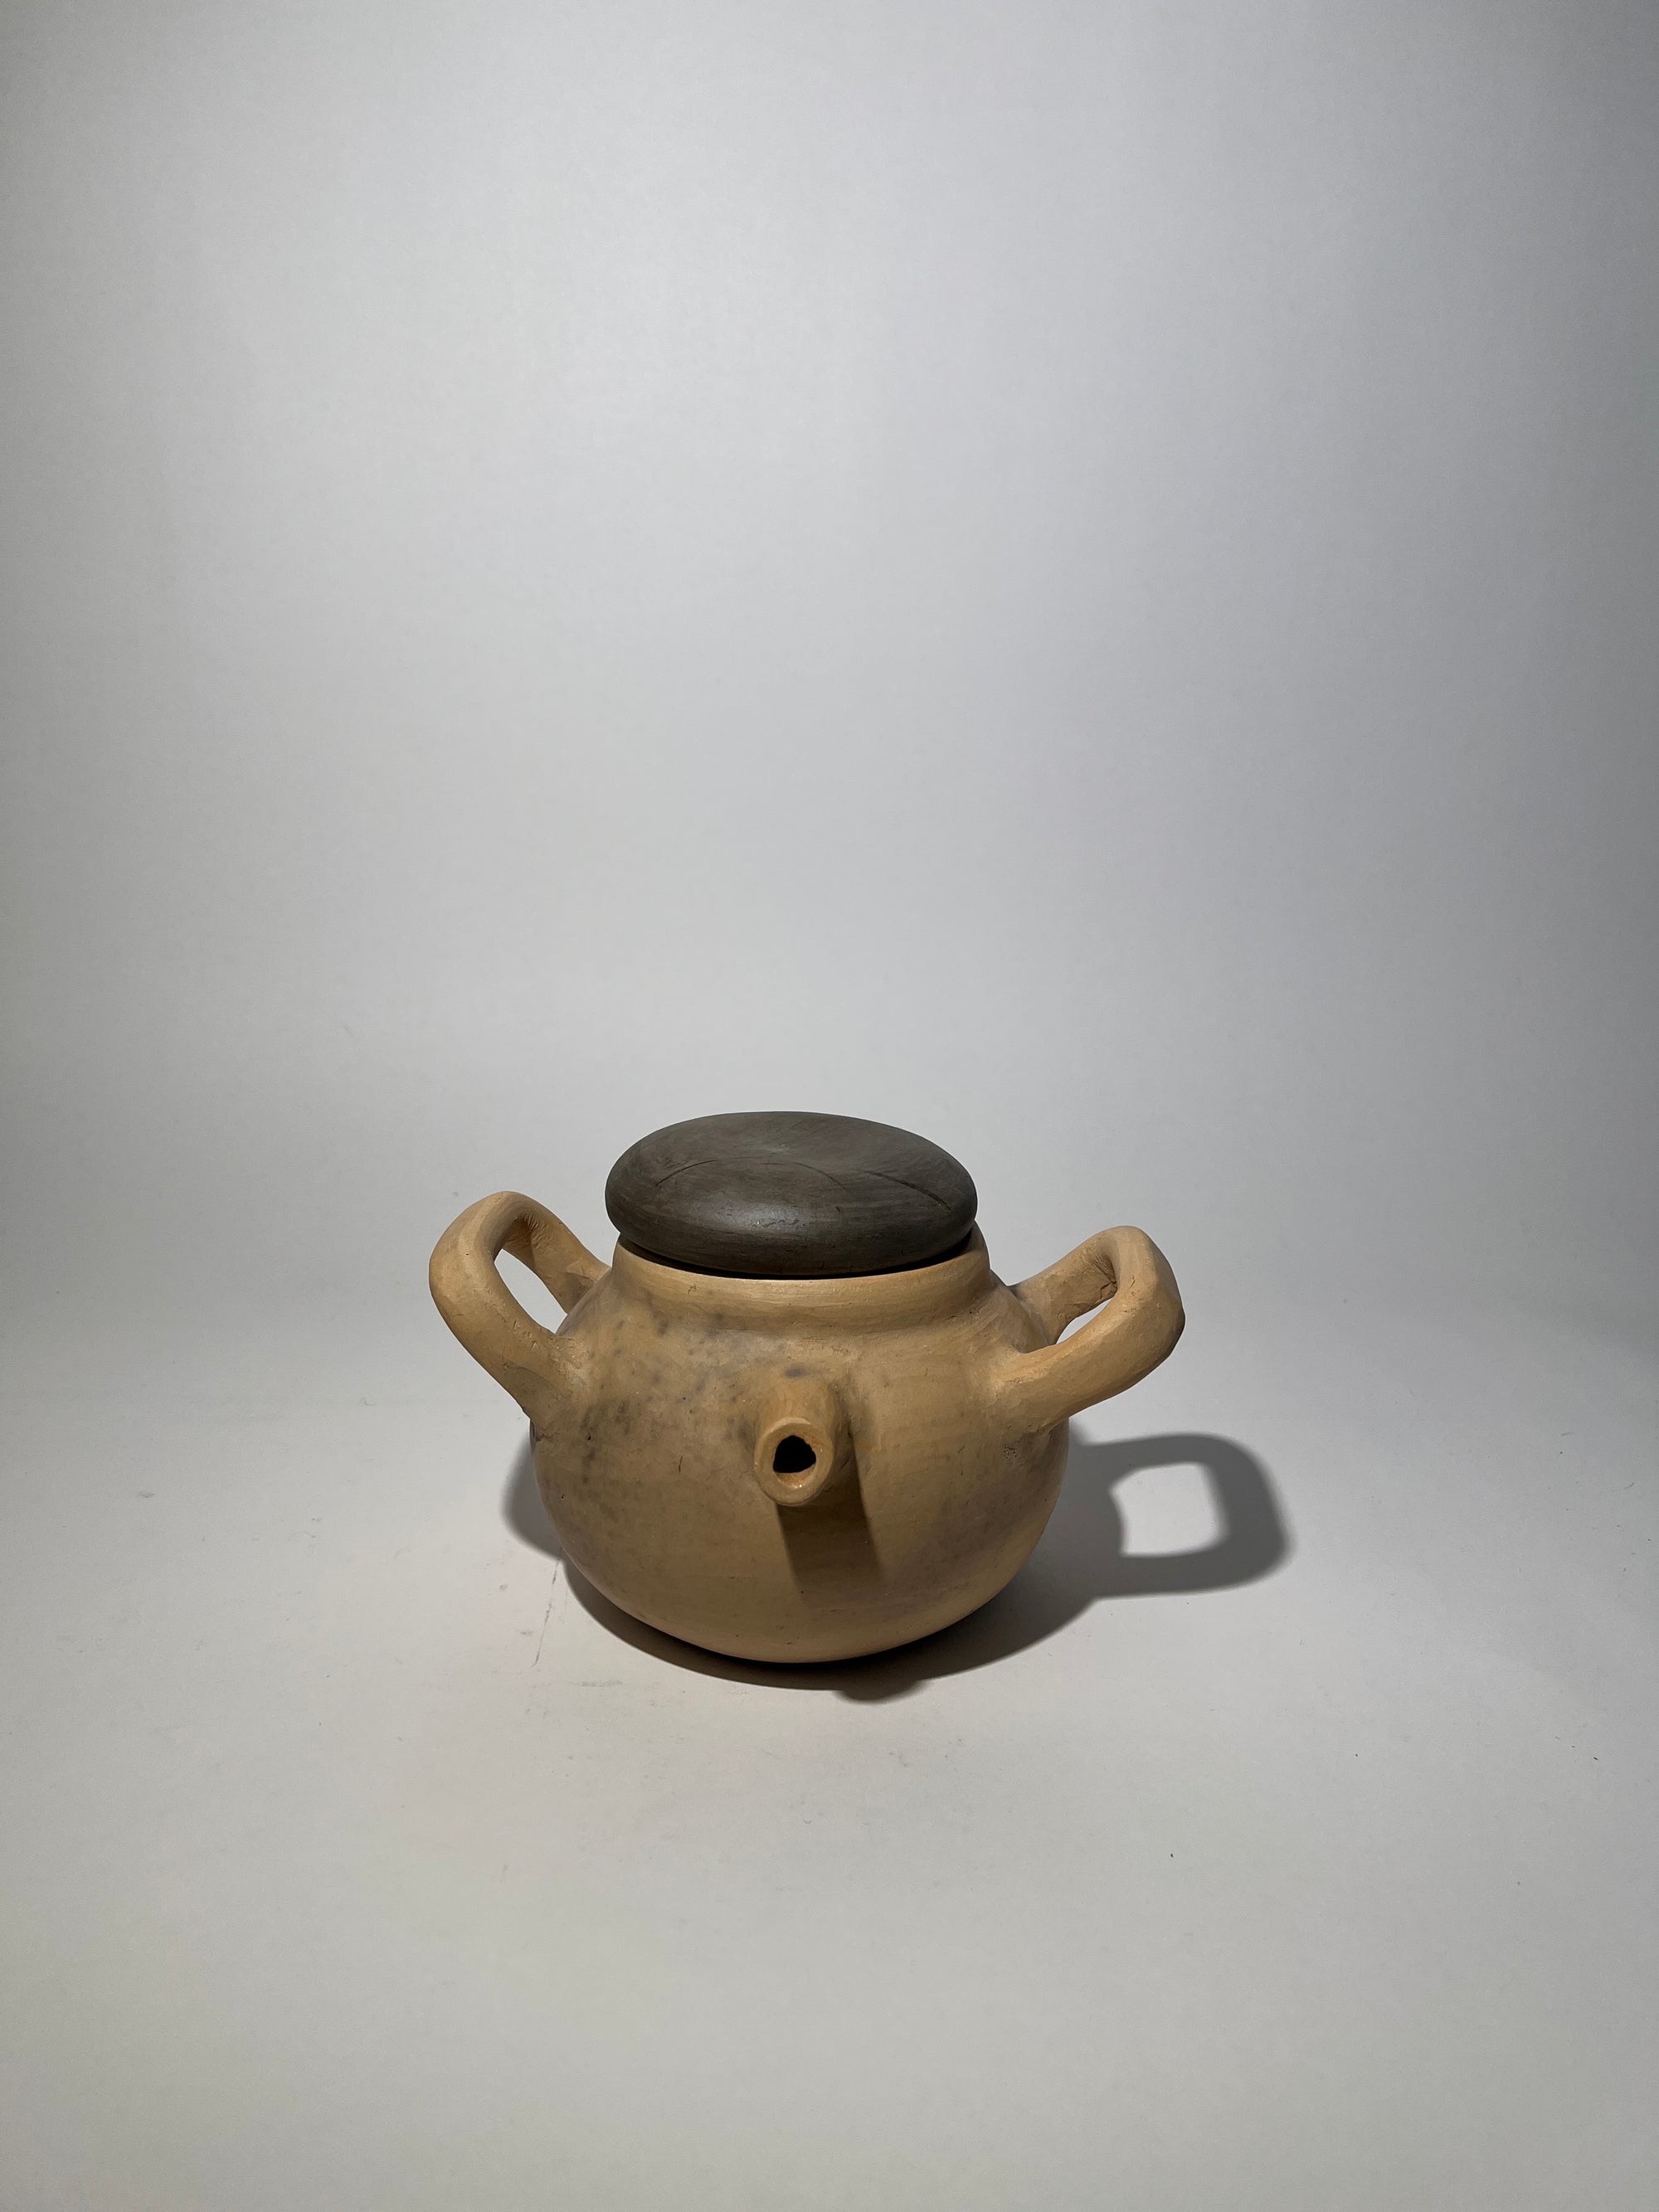 Handmade Mexican Clay Pot with Handles